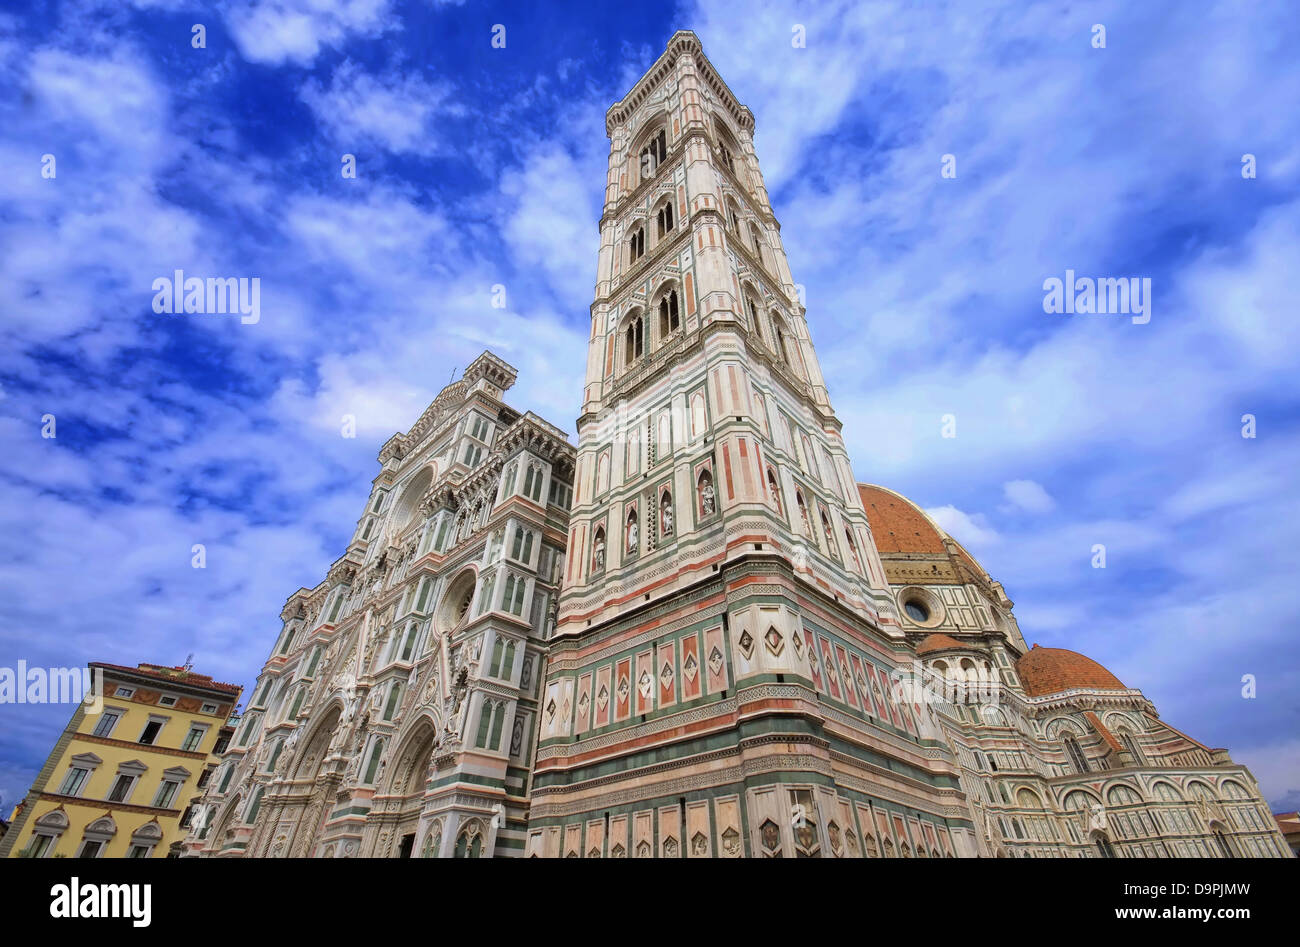 Florenz Dom - Florence cathedral 06 Stock Photo